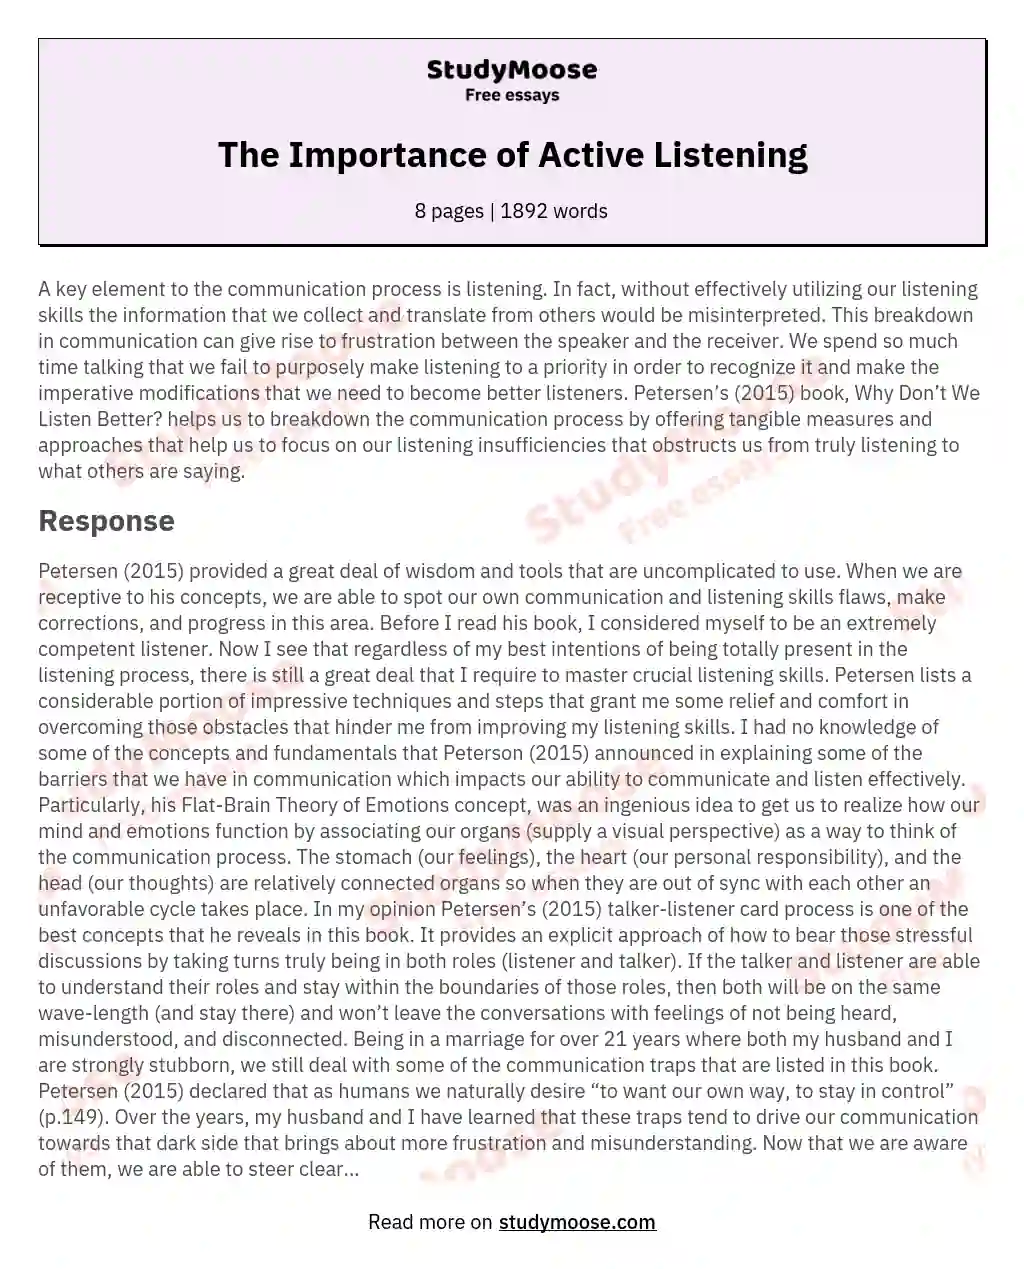 The Importance of Active Listening essay